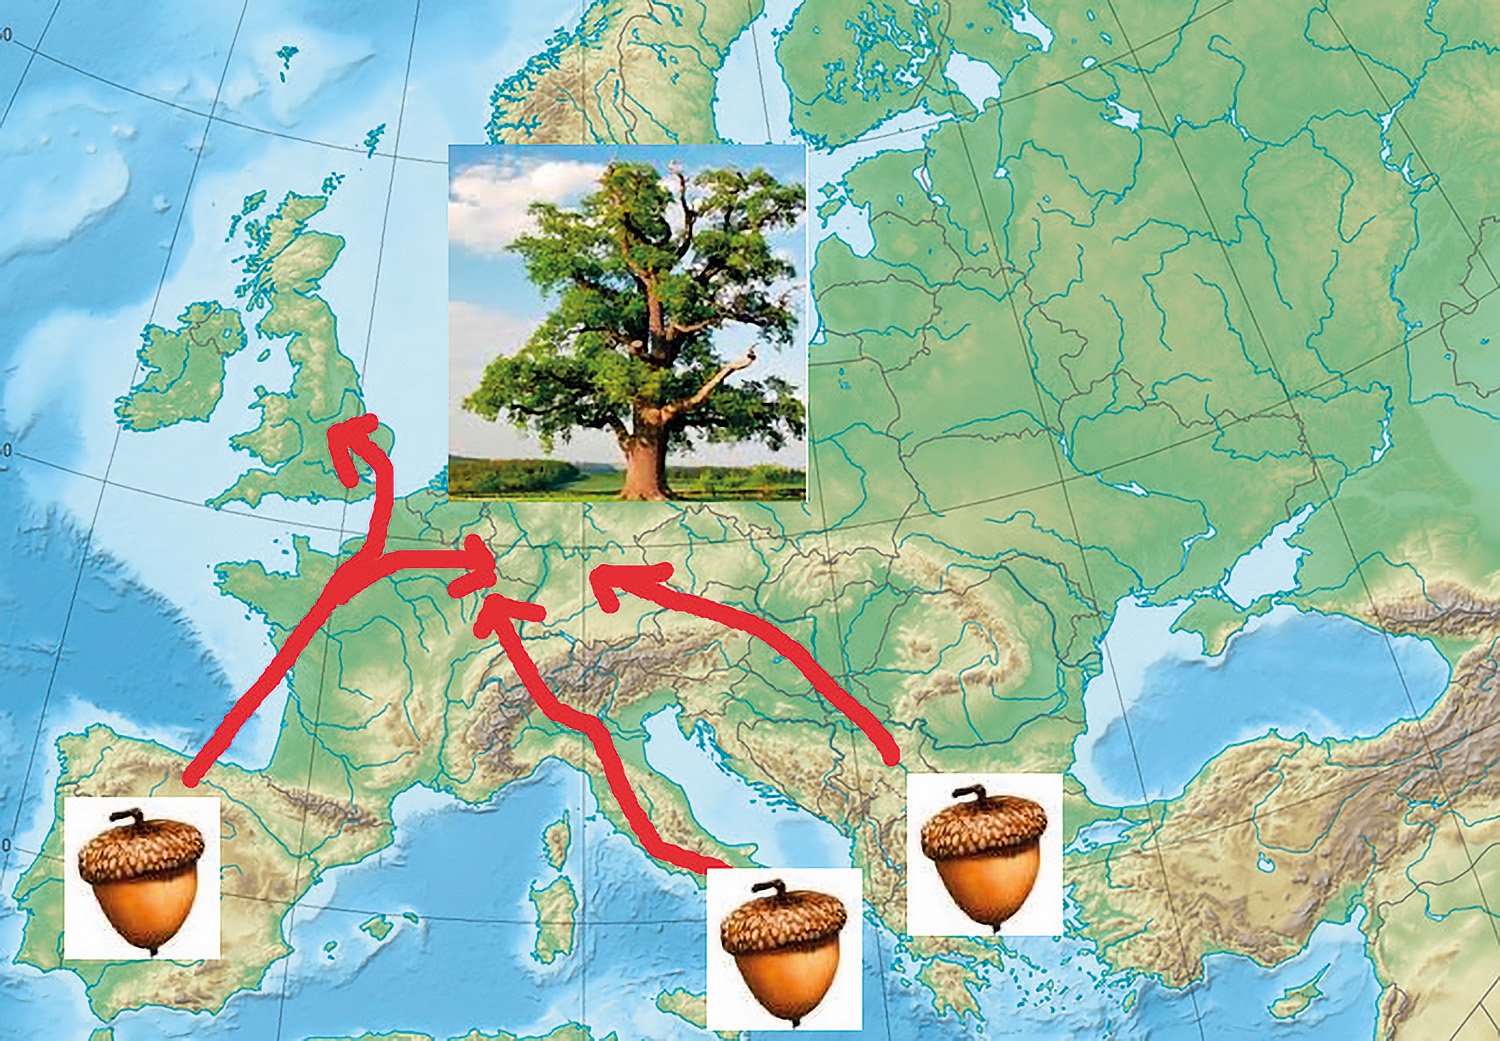 Figure 4: The influence that people had on the distribution of oaks in Europe may have been far greater than is currently accepted. One argument put forward in an interesting article suggests that the northward spreading of oaks from their glacial refugia after the last ice age was actually the result of the northward spreading of humans from the same areas. (Source and further information: © Old European Culture Blog, 13 November 2014)